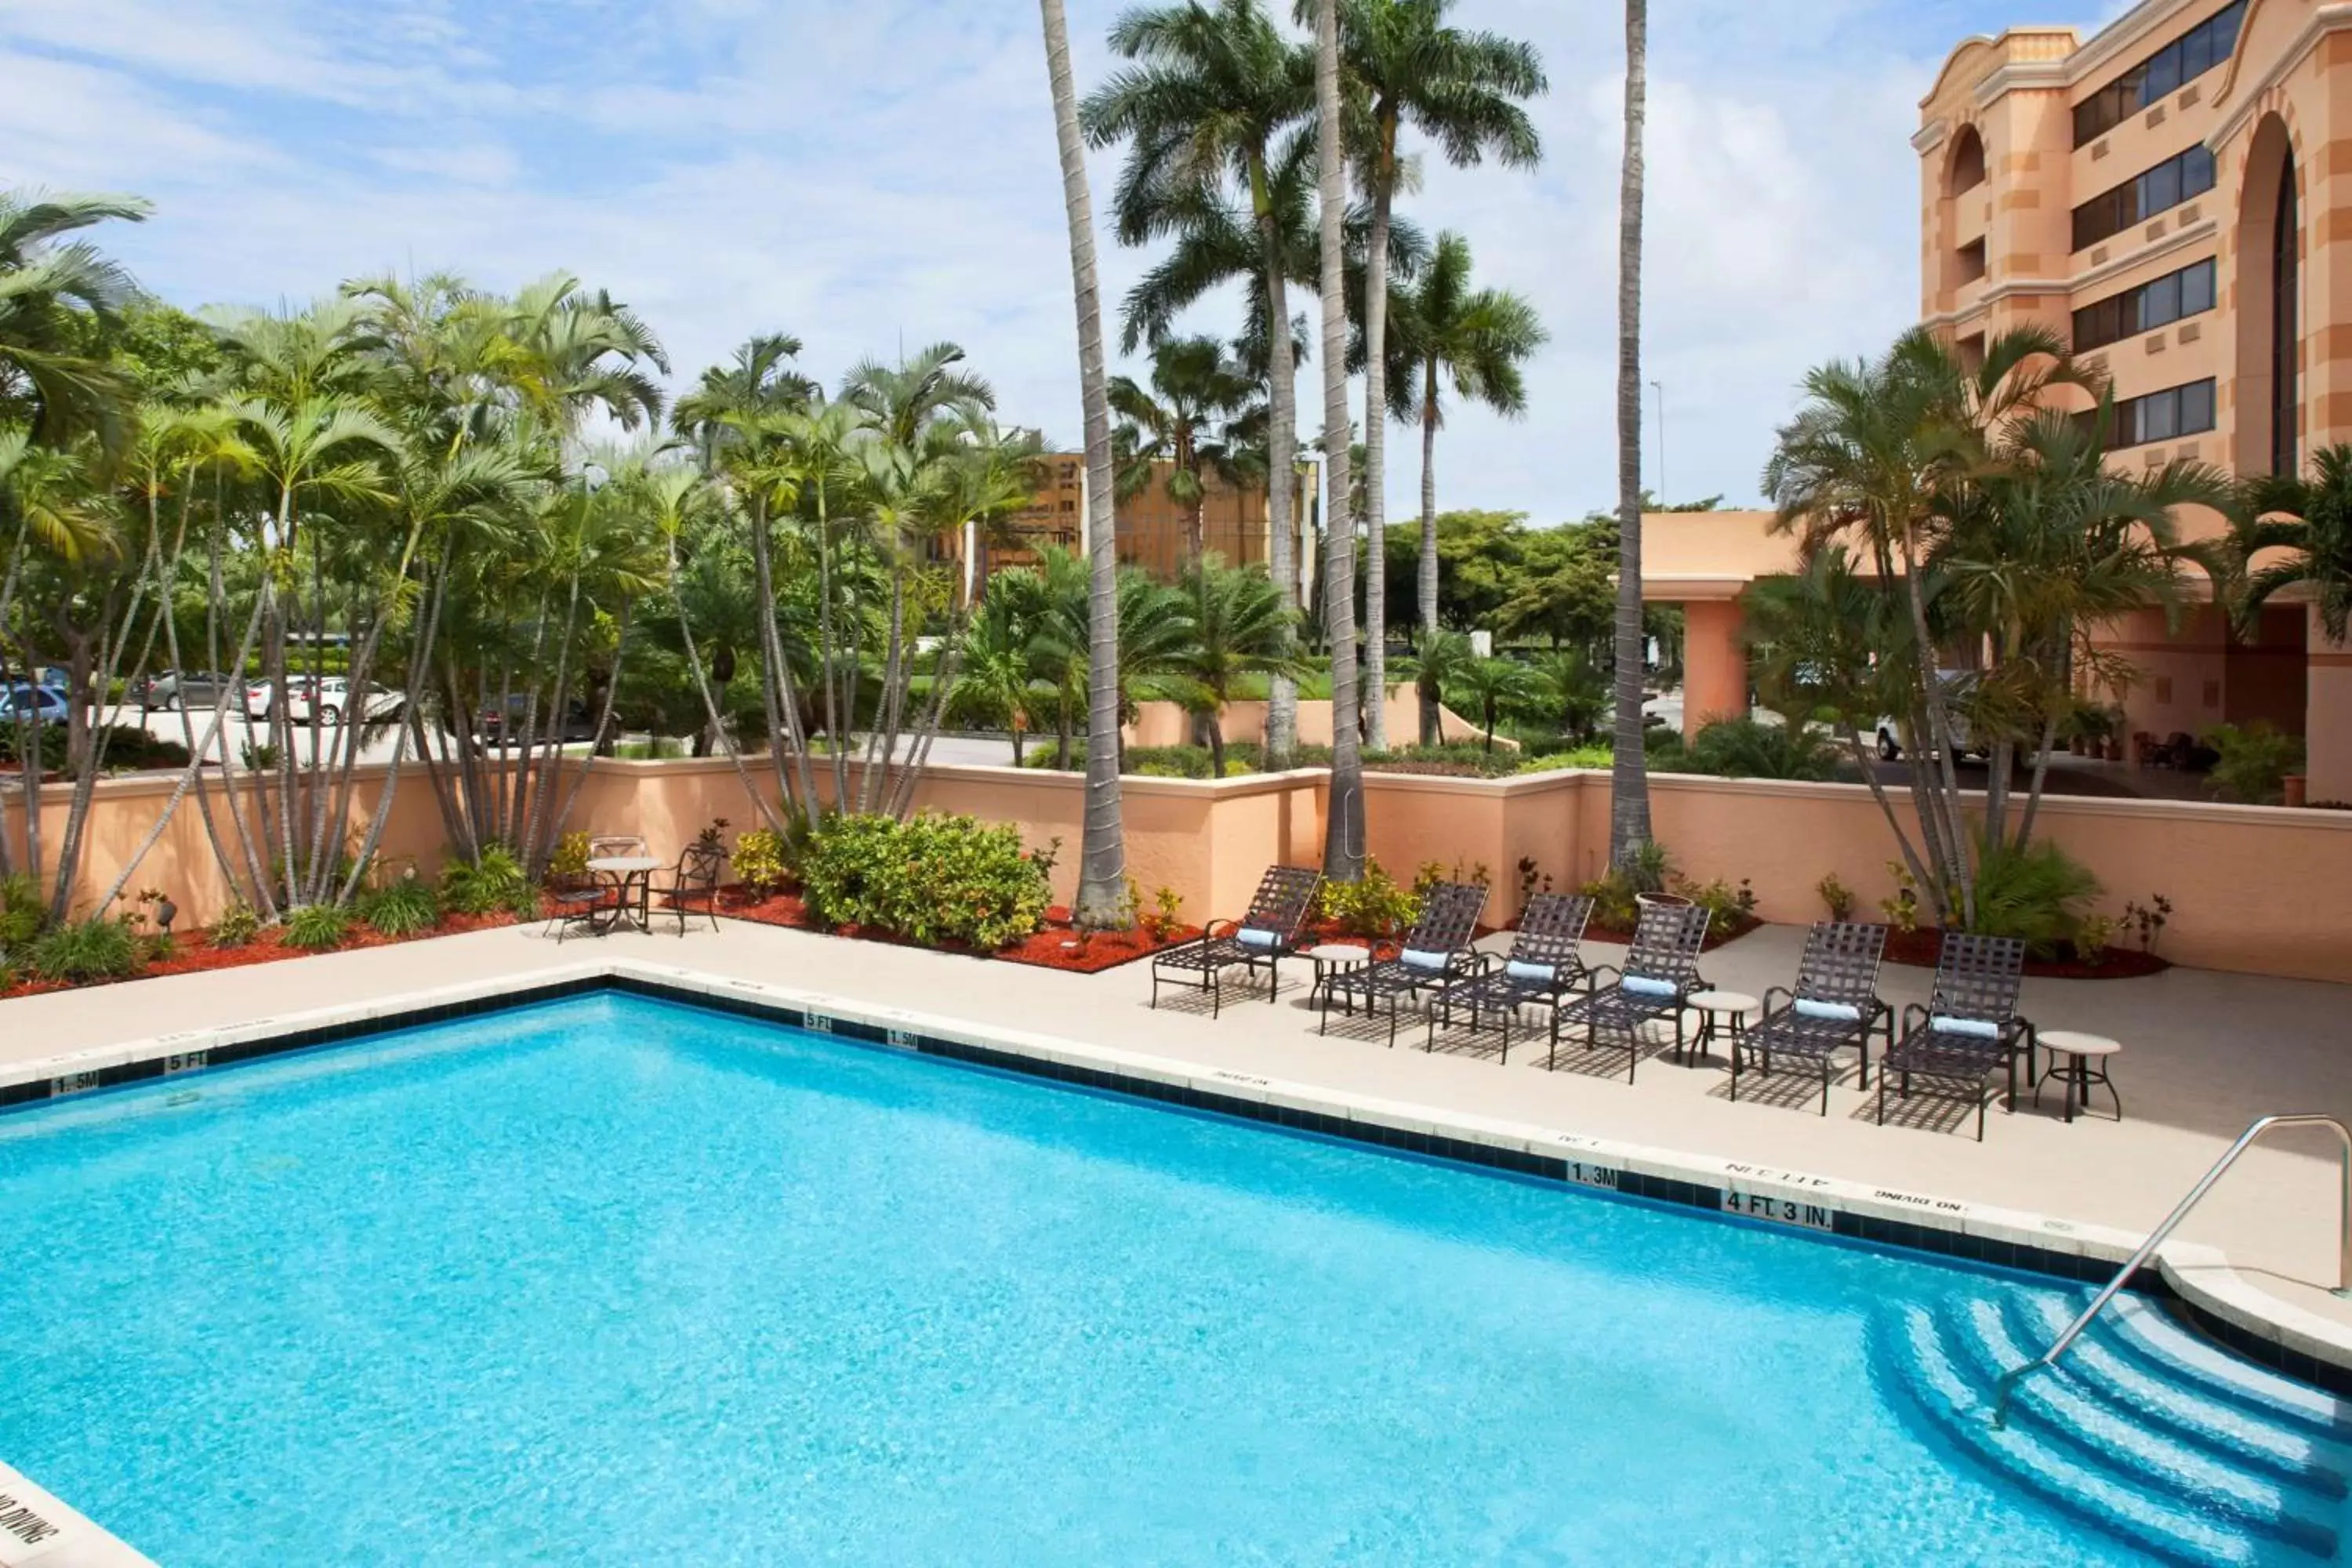 Property building, Swimming Pool in DoubleTree by Hilton Hotel West Palm Beach Airport